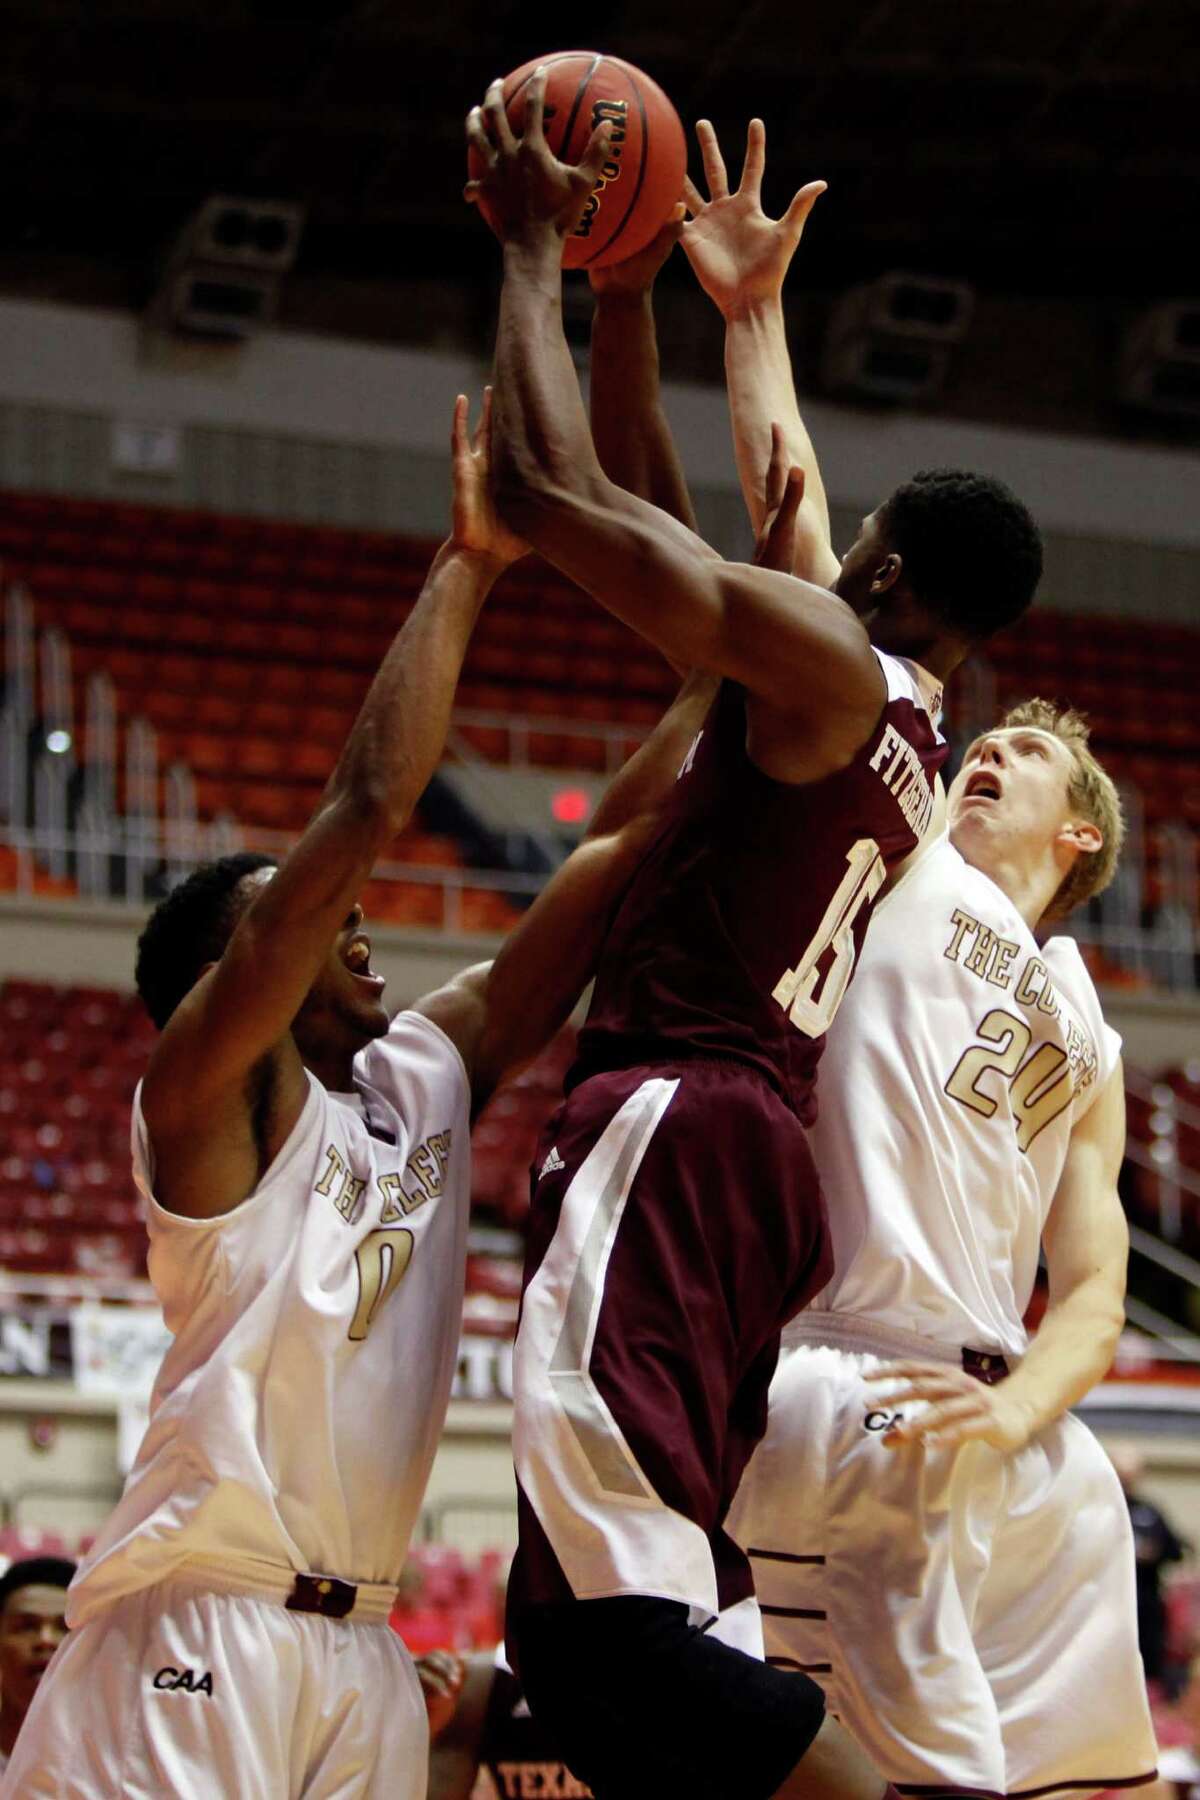 College of Charleston forward Donovan Gilmore, left, and teammate Canyon Barry, battle for a rebound against Texas A&M forward Davonte Fitzgerald during a NCAA college basketball game in San Juan, Puerto Rico, Friday, Nov. 21, 2014. (AP Photo/Ricardo Arduengo)